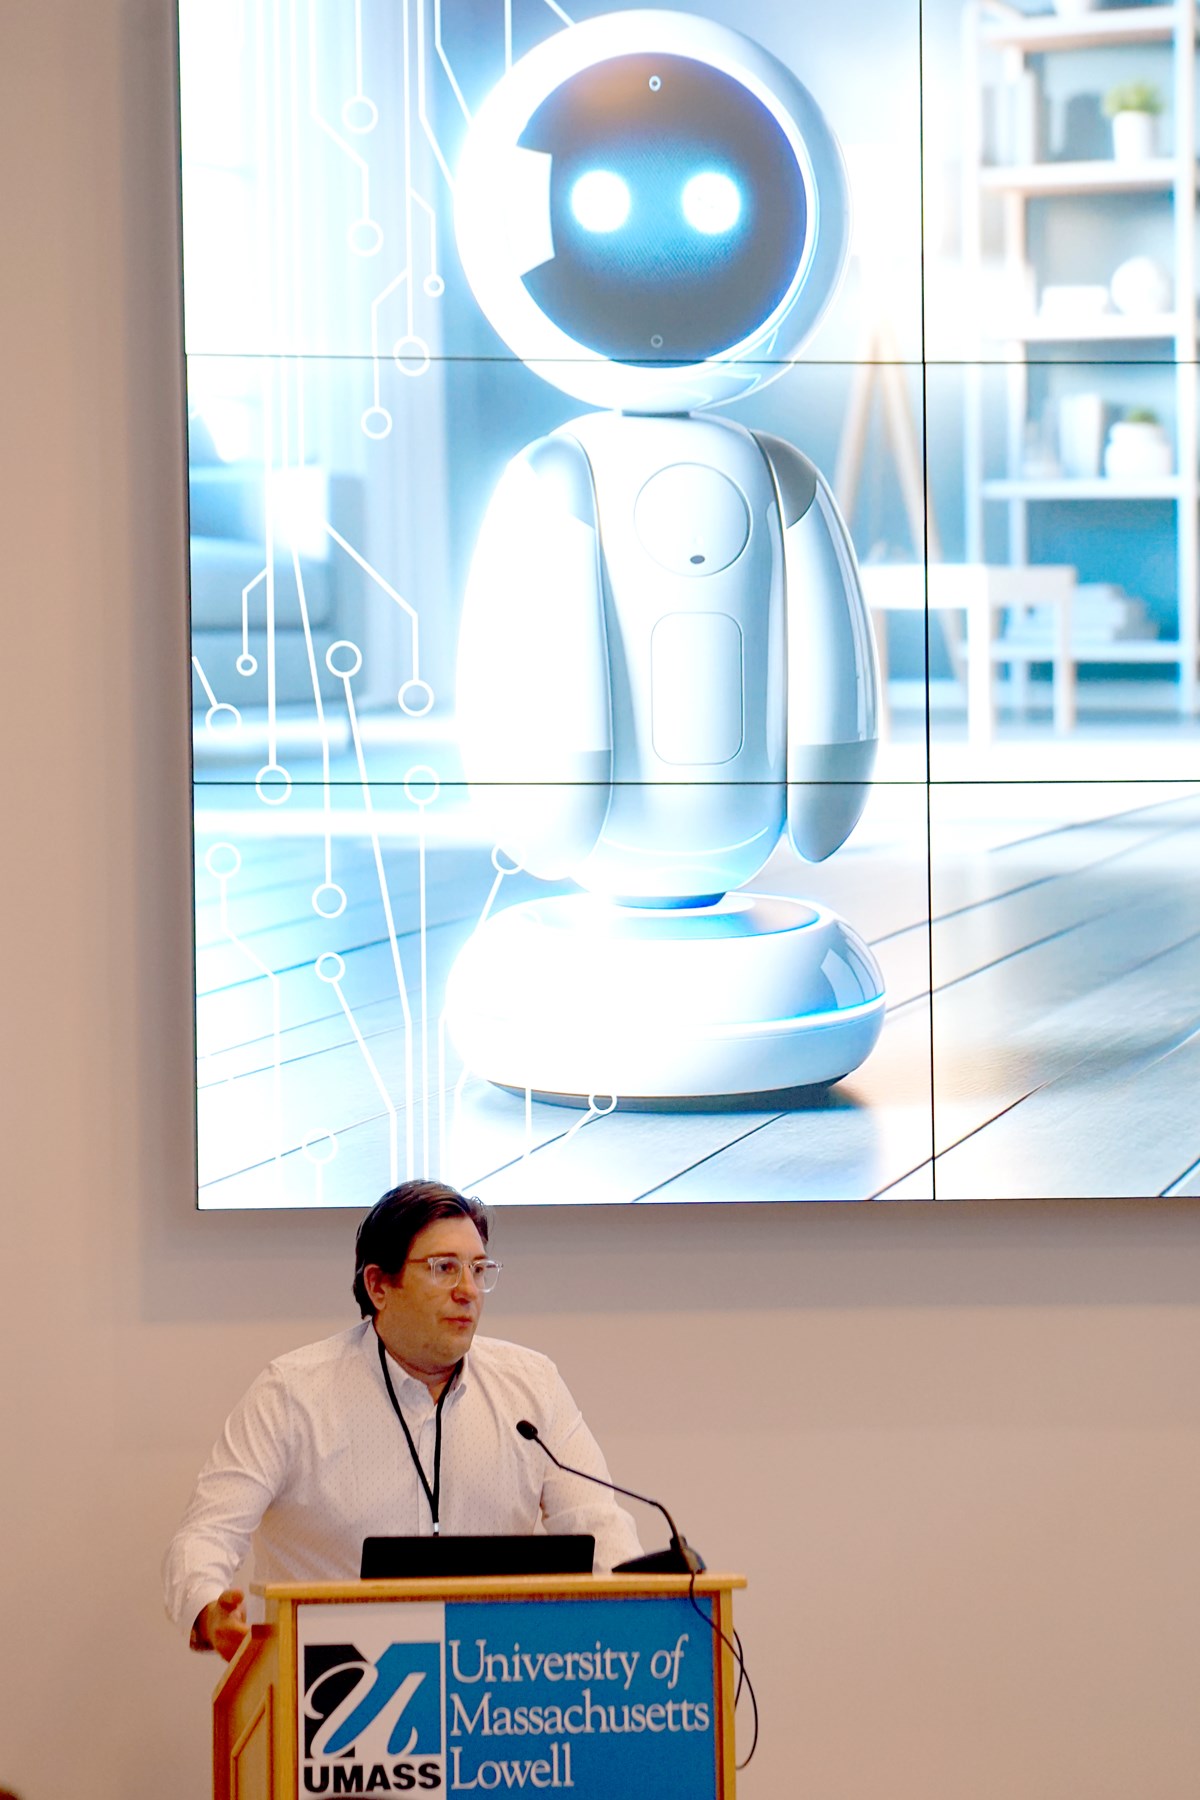 A person speaks at a podium while standing in front of a screen with a robot displayed on it.